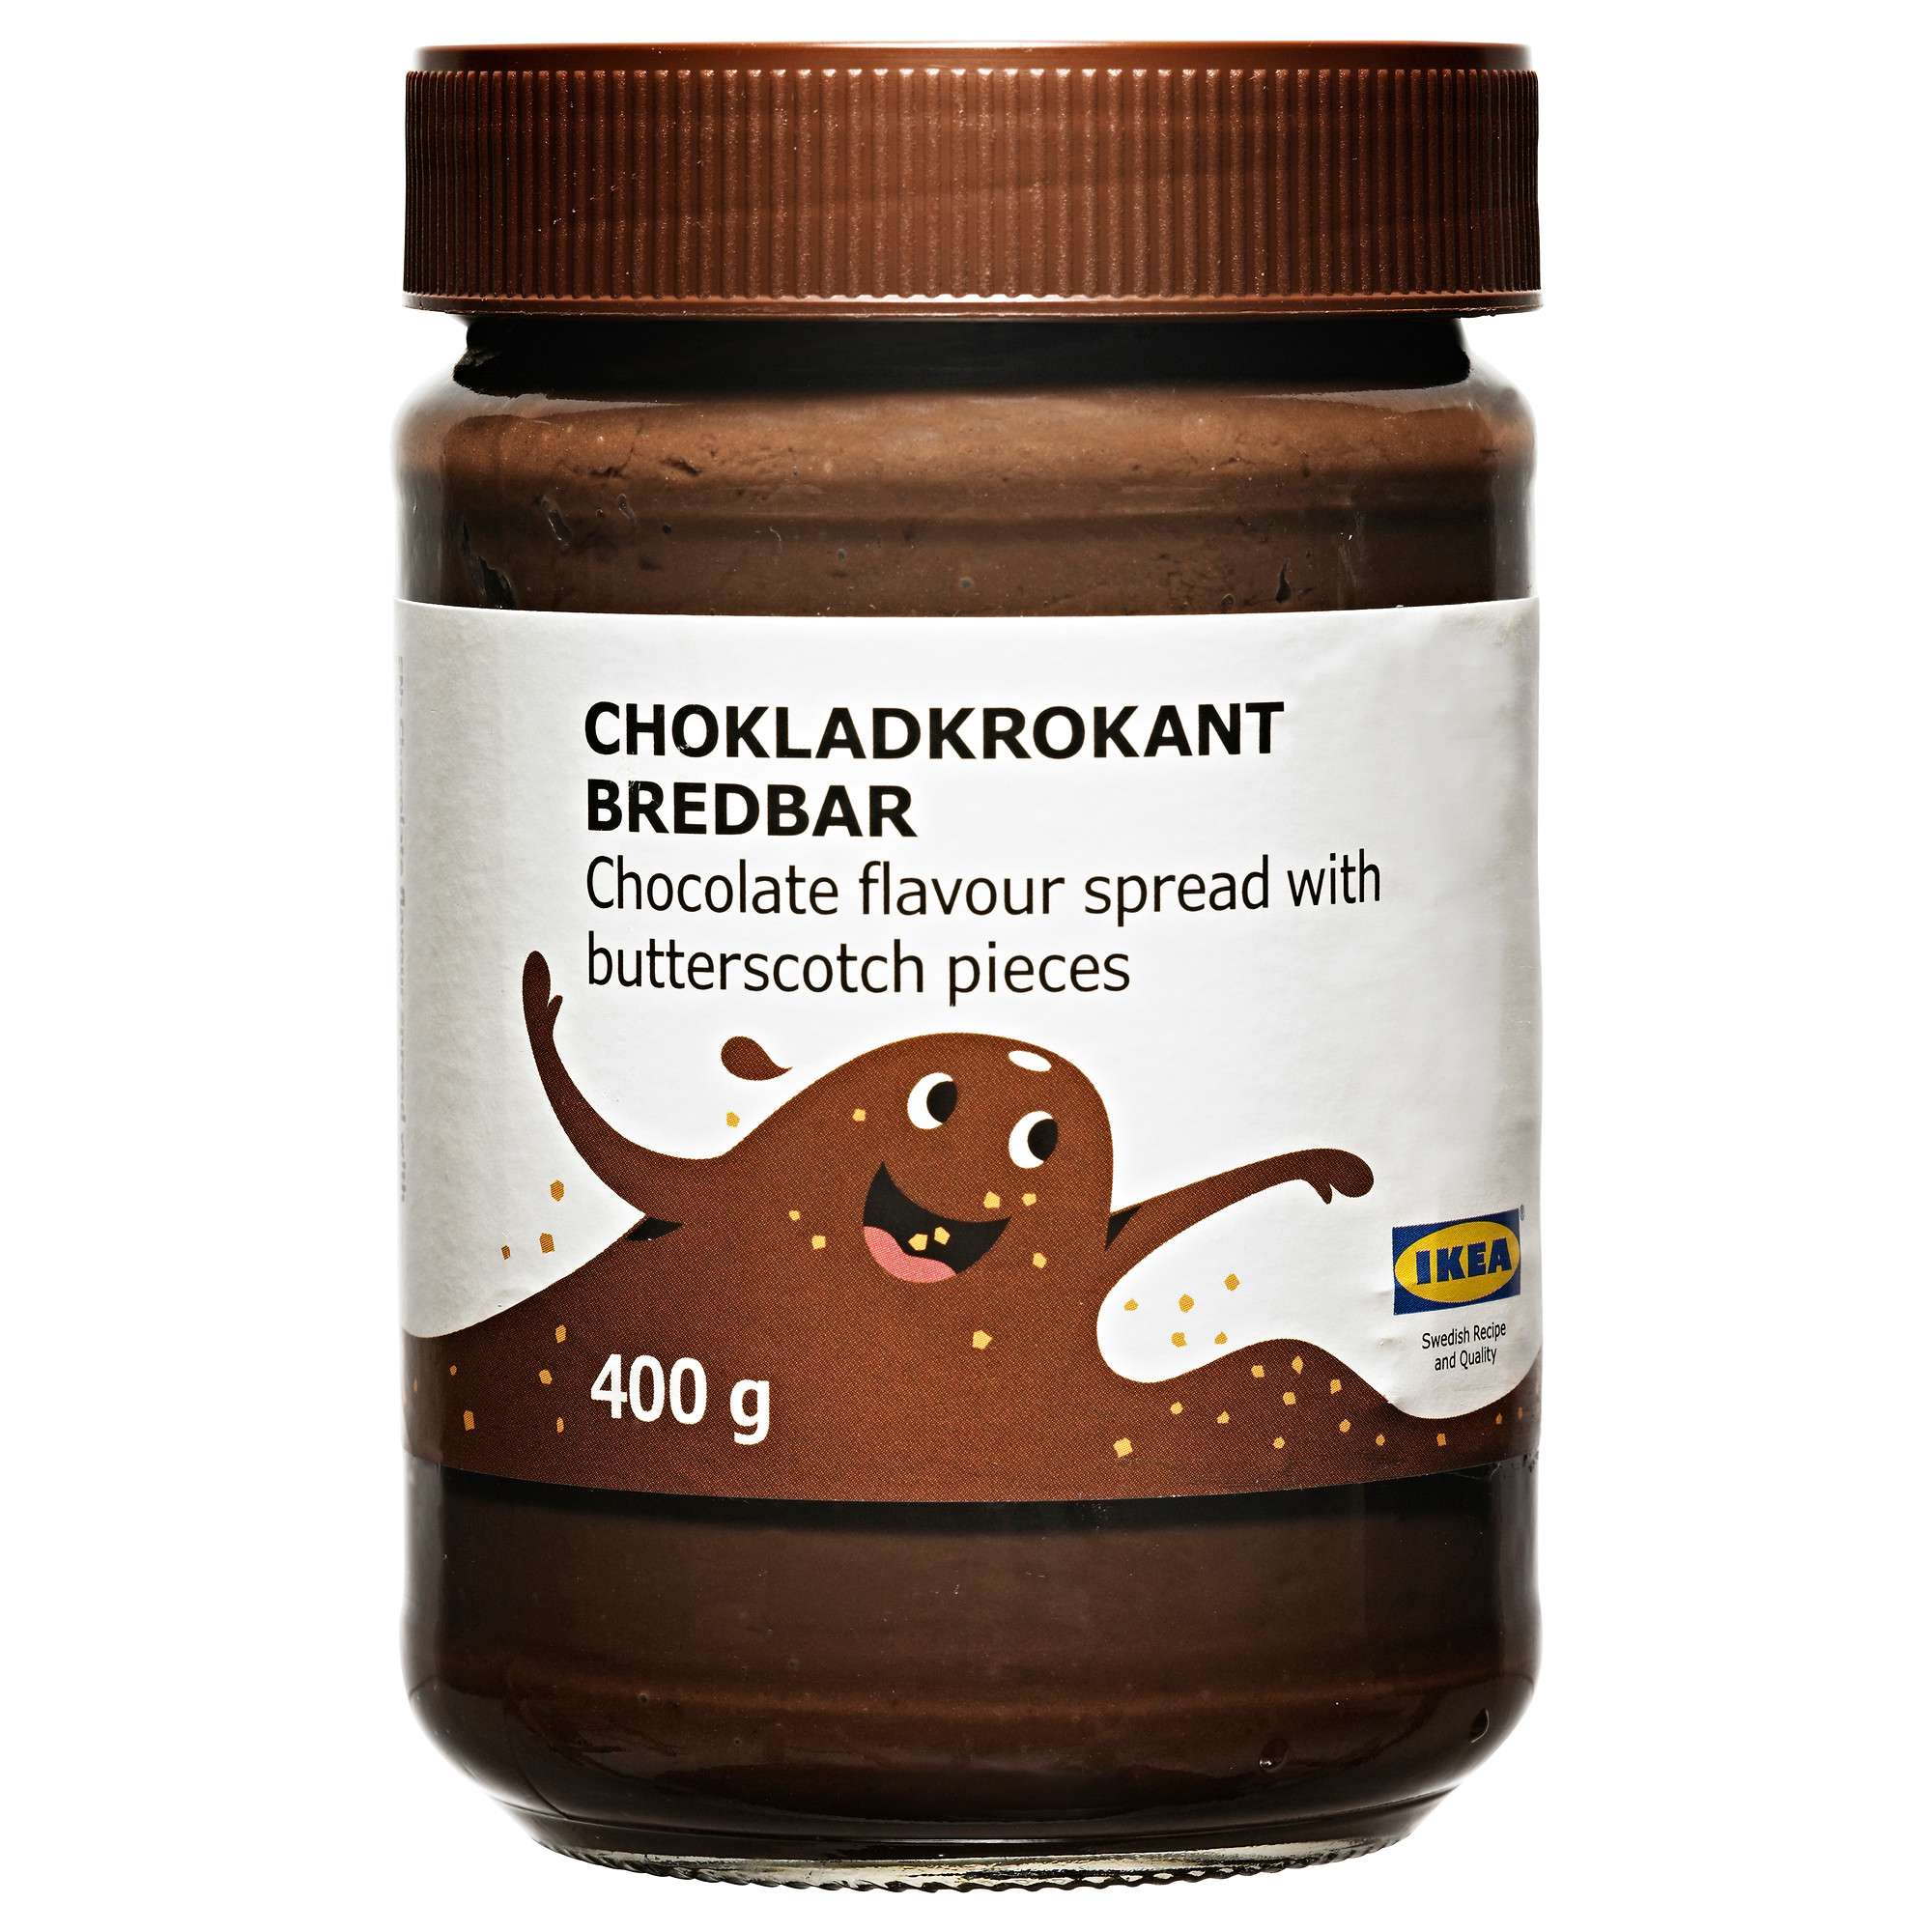 IKEA expands the ongoing chocolate recall by four more products, which includes the Chokladkrokant Bredbar (chocolate butterscotch spread, above), which are not suitable for persons allergic or sensitive to hazelnut and/or almond. Photo: SCMP Pictures